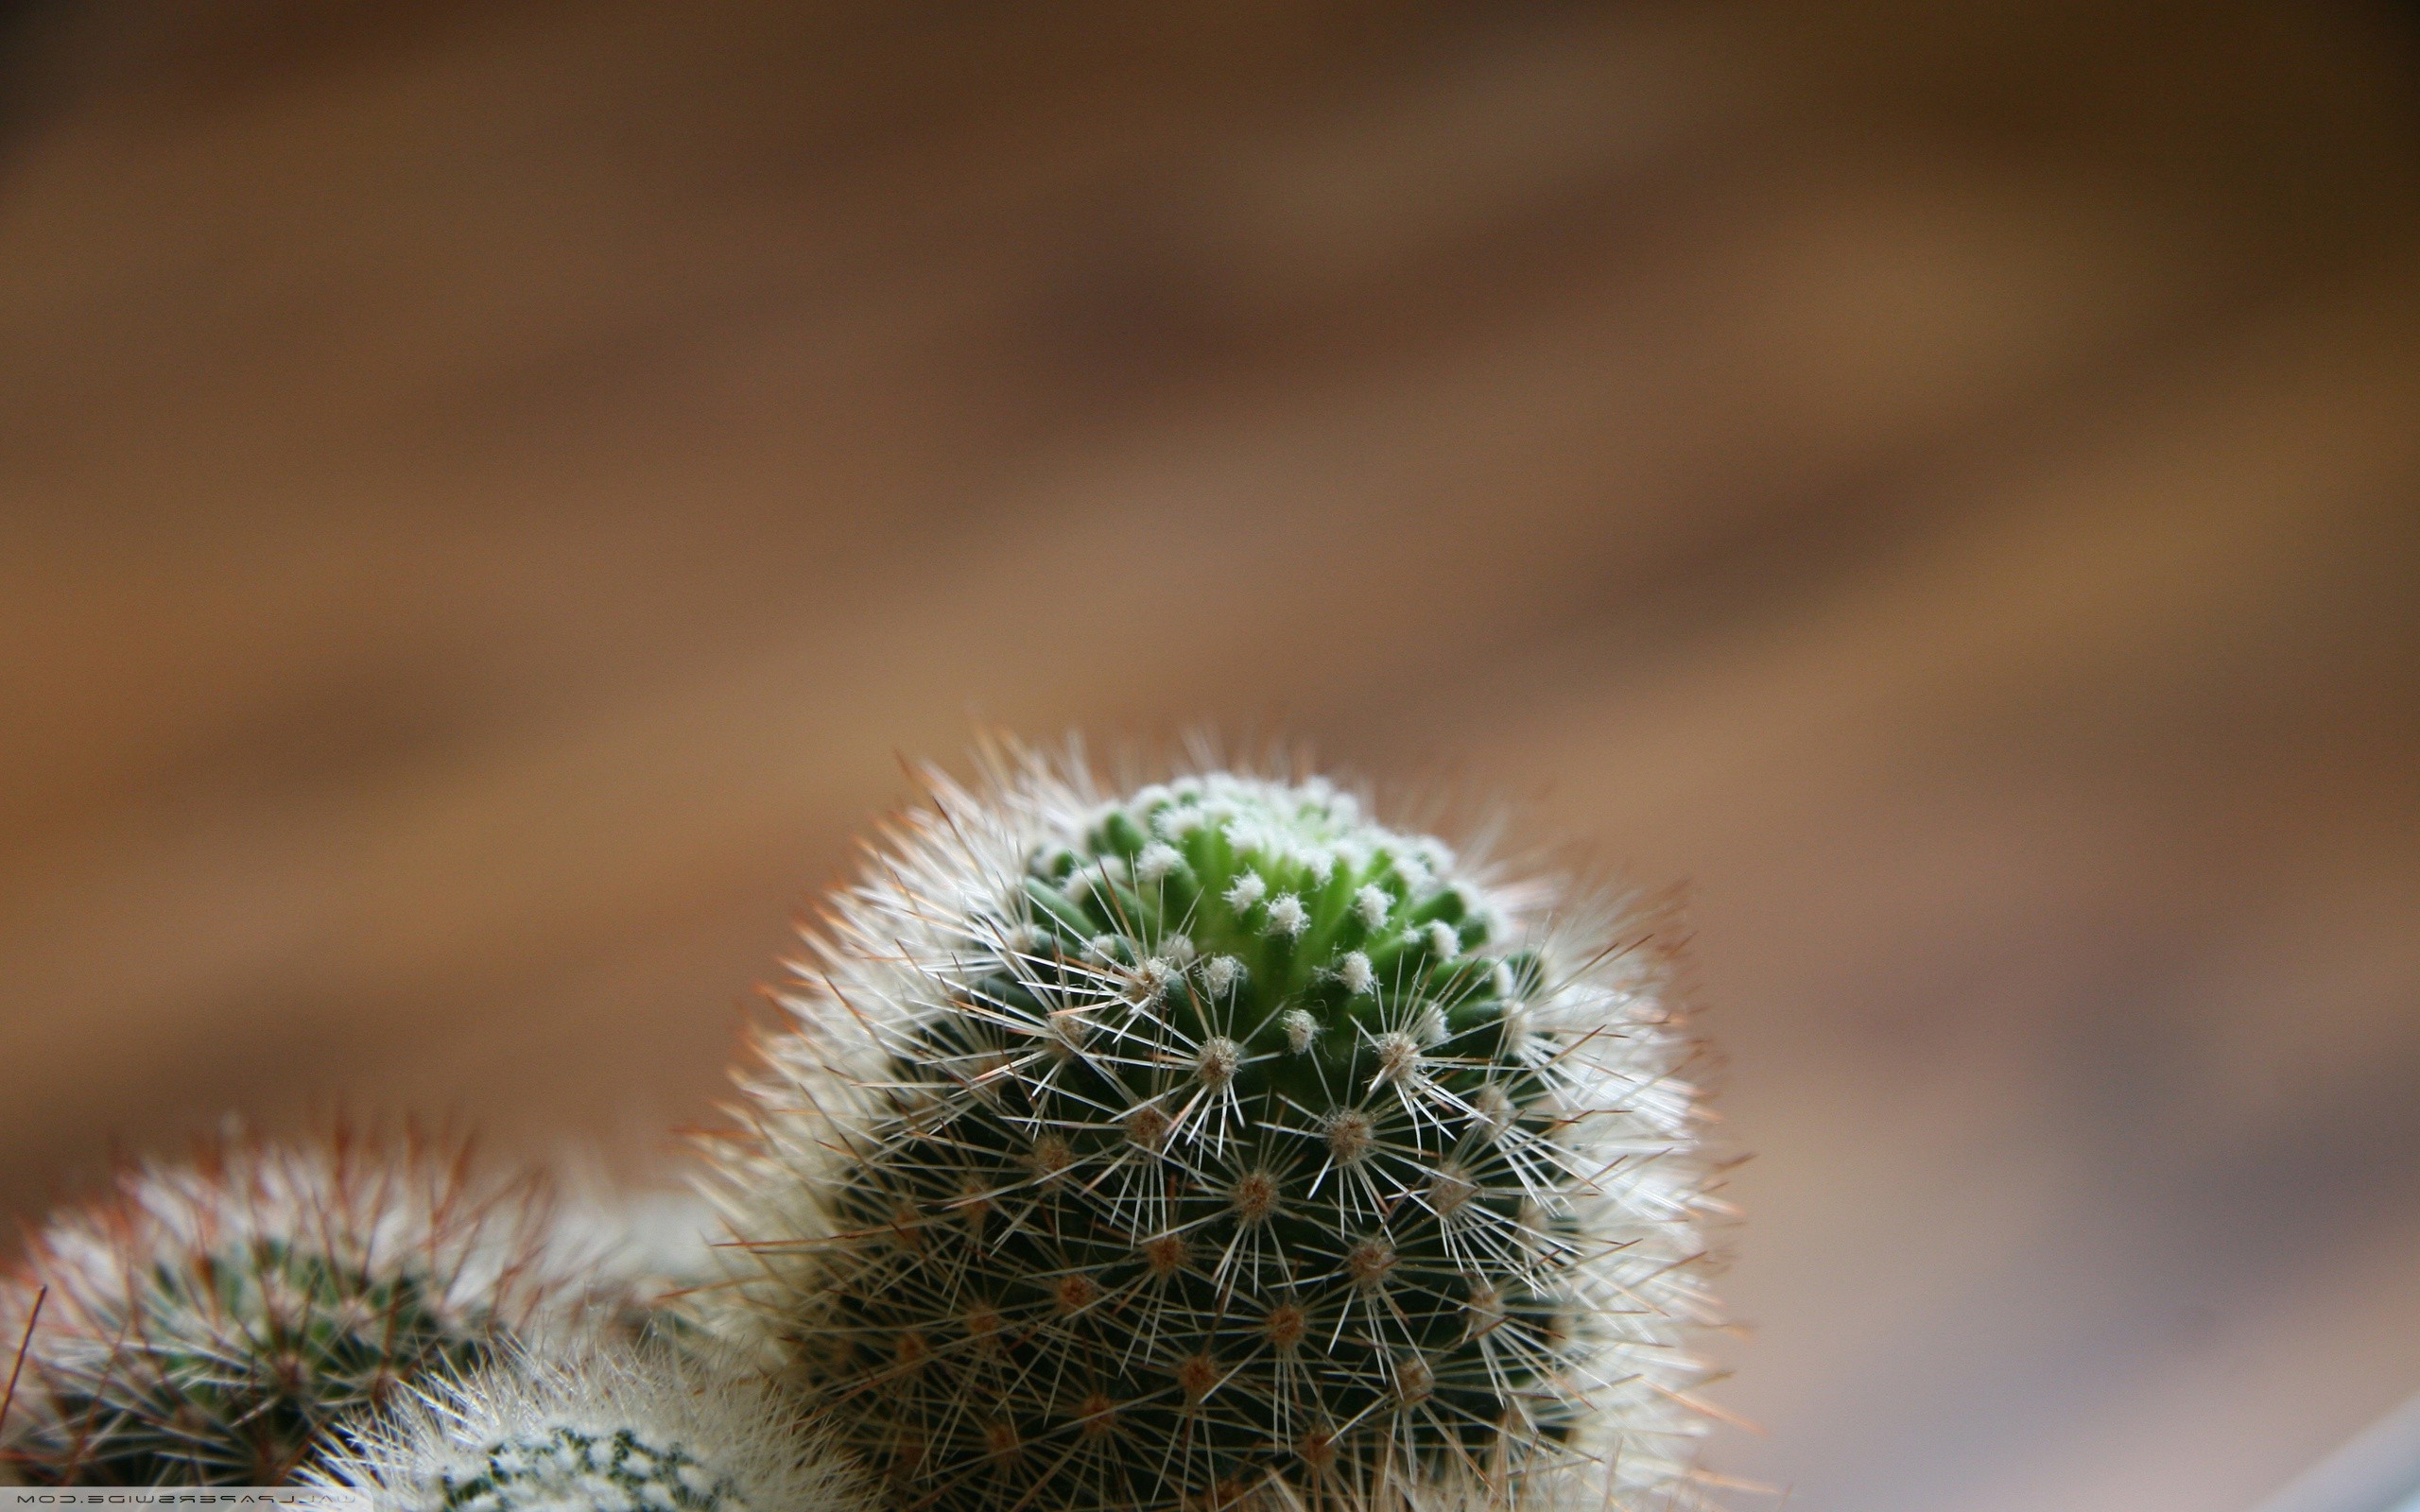 macro, Simple background, Minimalism, Cactus, Plants, Depth of field  Wallpapers HD / Desktop and Mobile Backgrounds